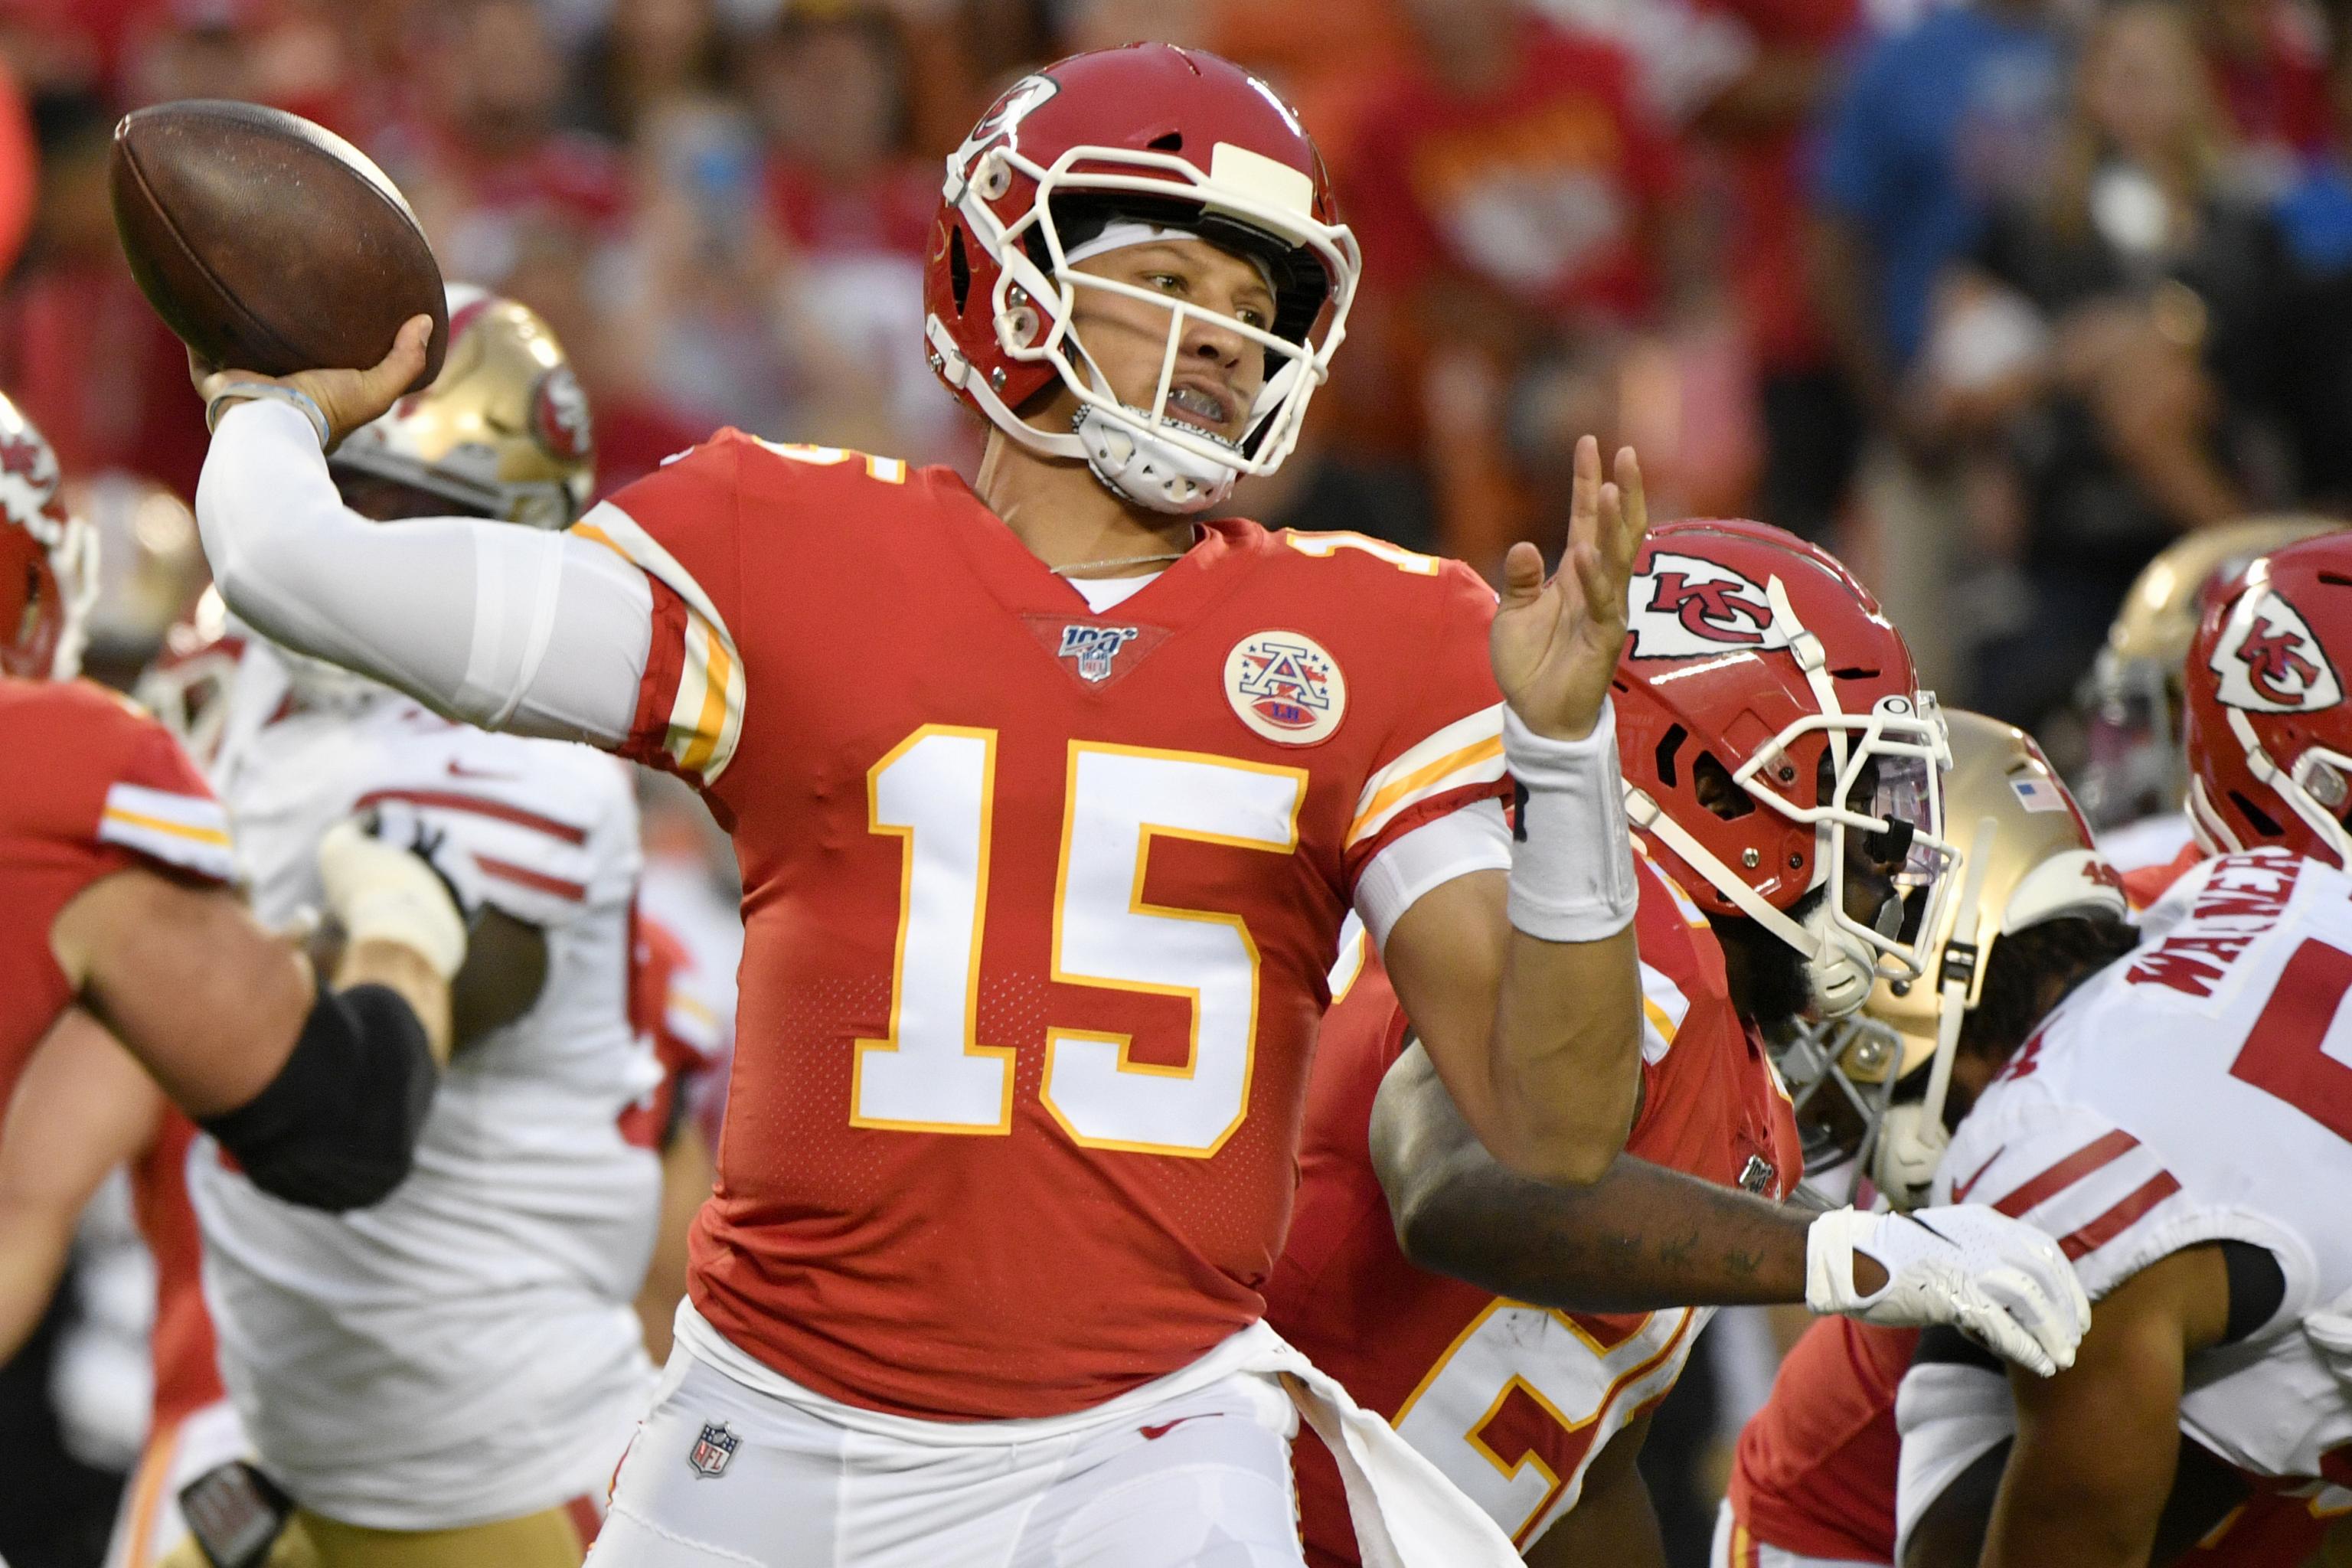 Super Bowl 2020 Kickoff Time: When and Where to Watch 49ers vs. Chiefs | Scores, Highlights, Stats, and Rumors | Bleacher Report